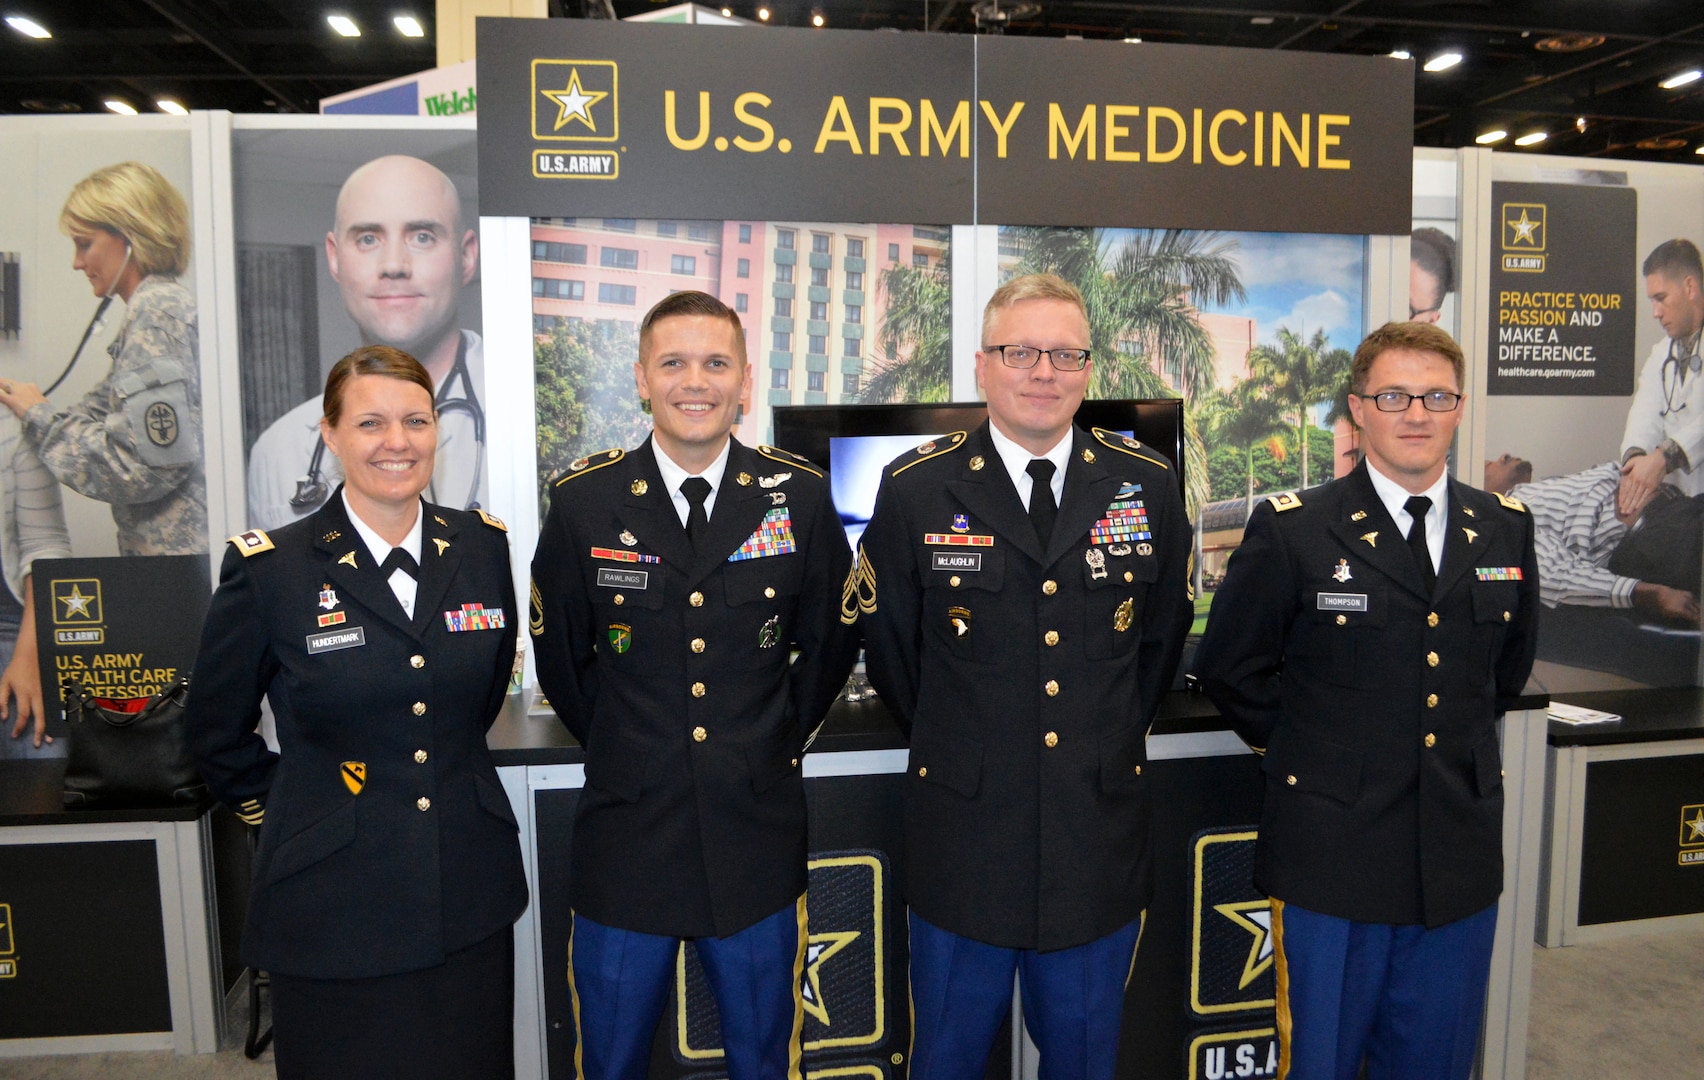 Army recruiting teamwork on display at major medical conference in San